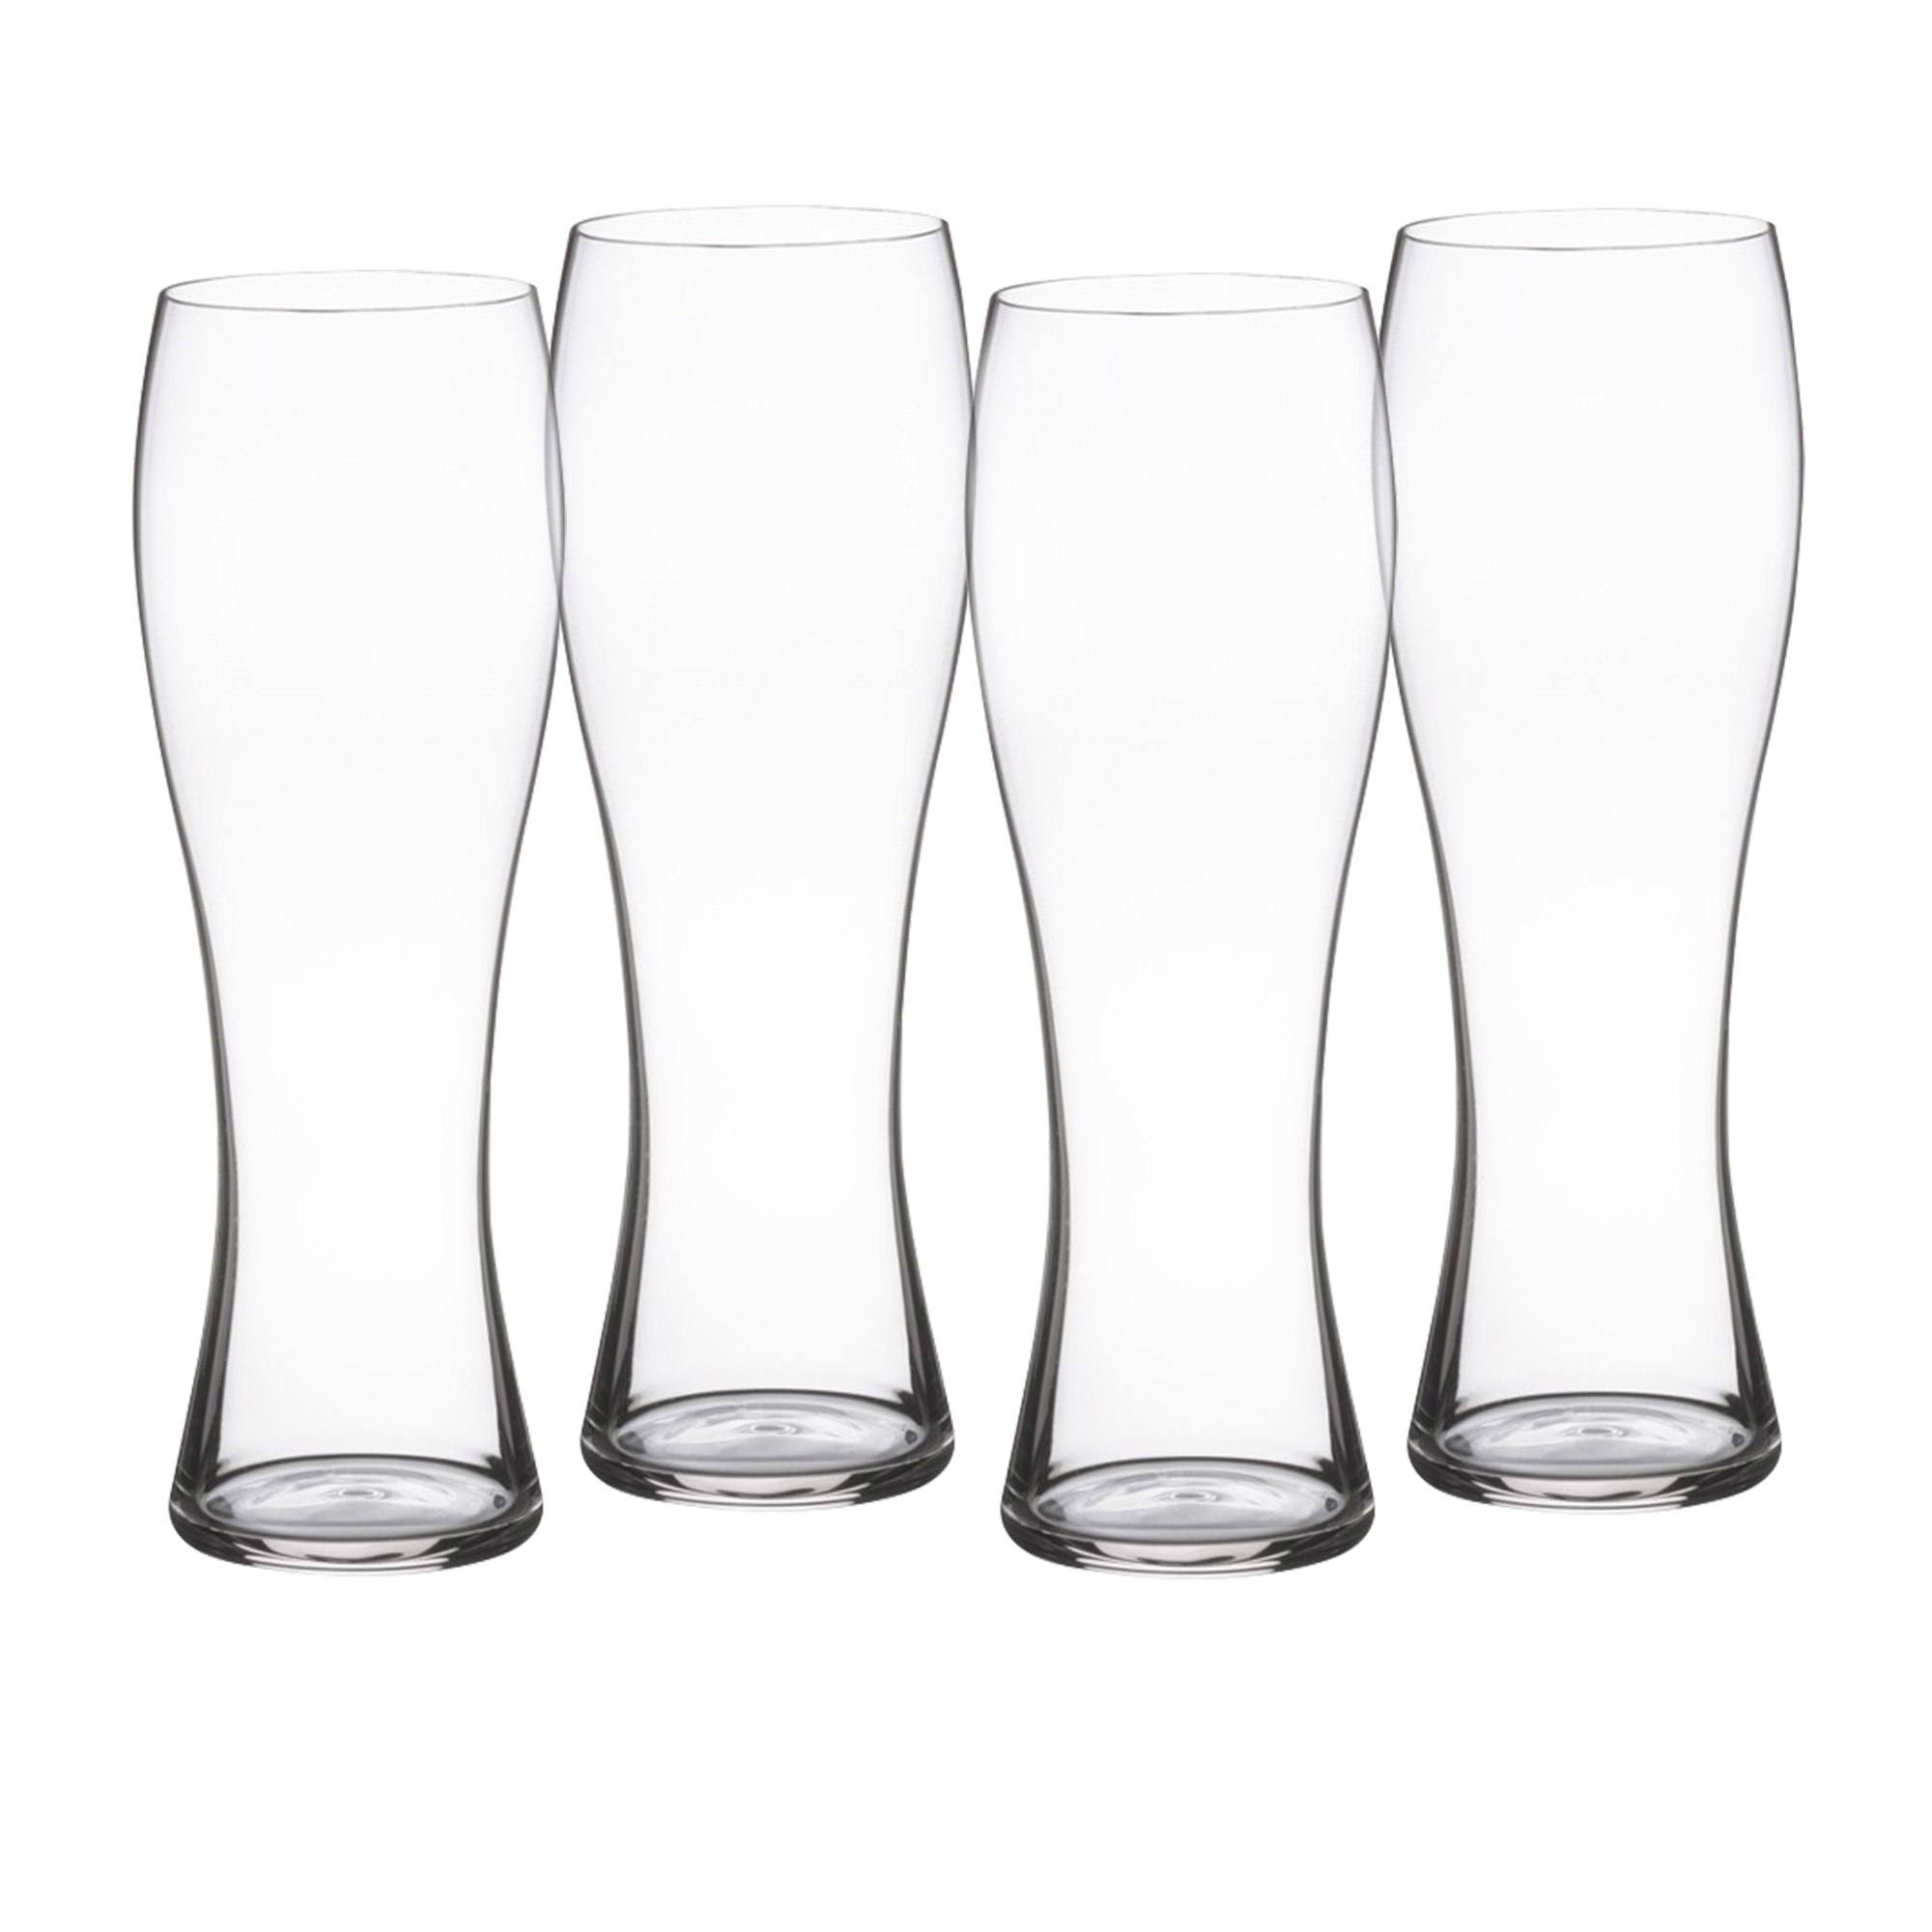 Spiegelau Beer Classics Wheat Beer Glass 700ml Set of 4 Image 1